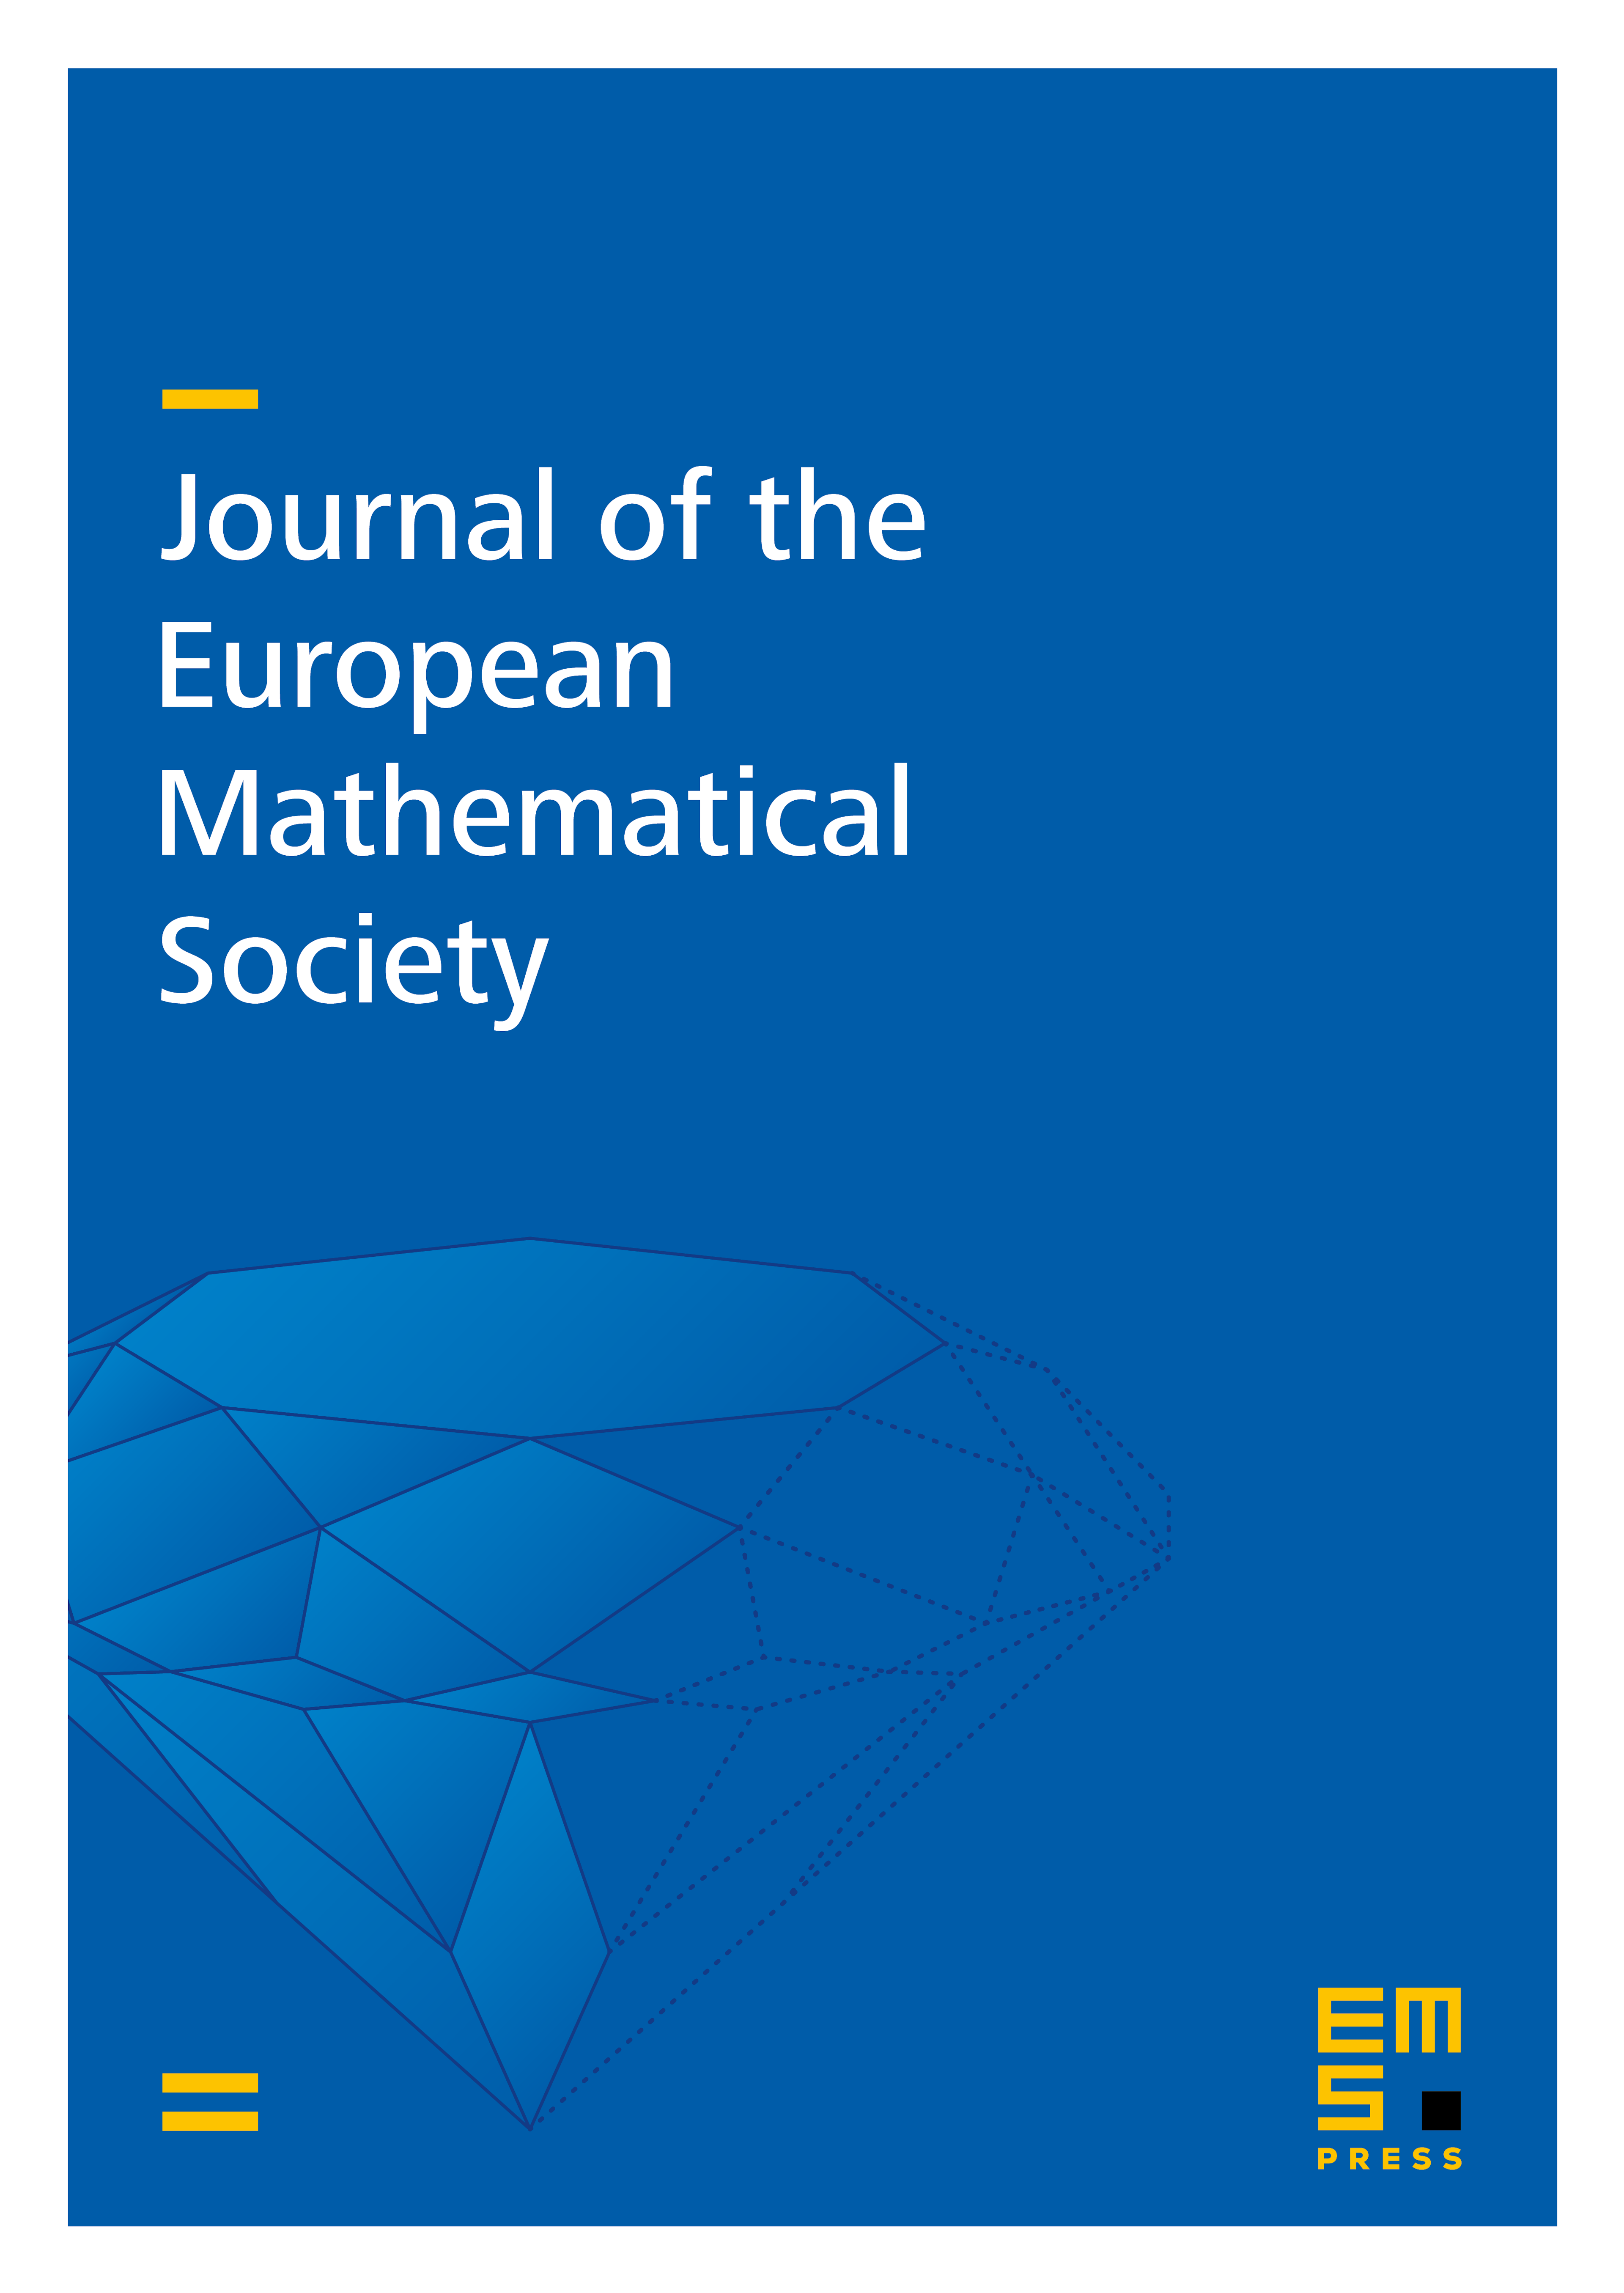 Uniform K-stability and asymptotics of energy functionals in Kähler geometry cover